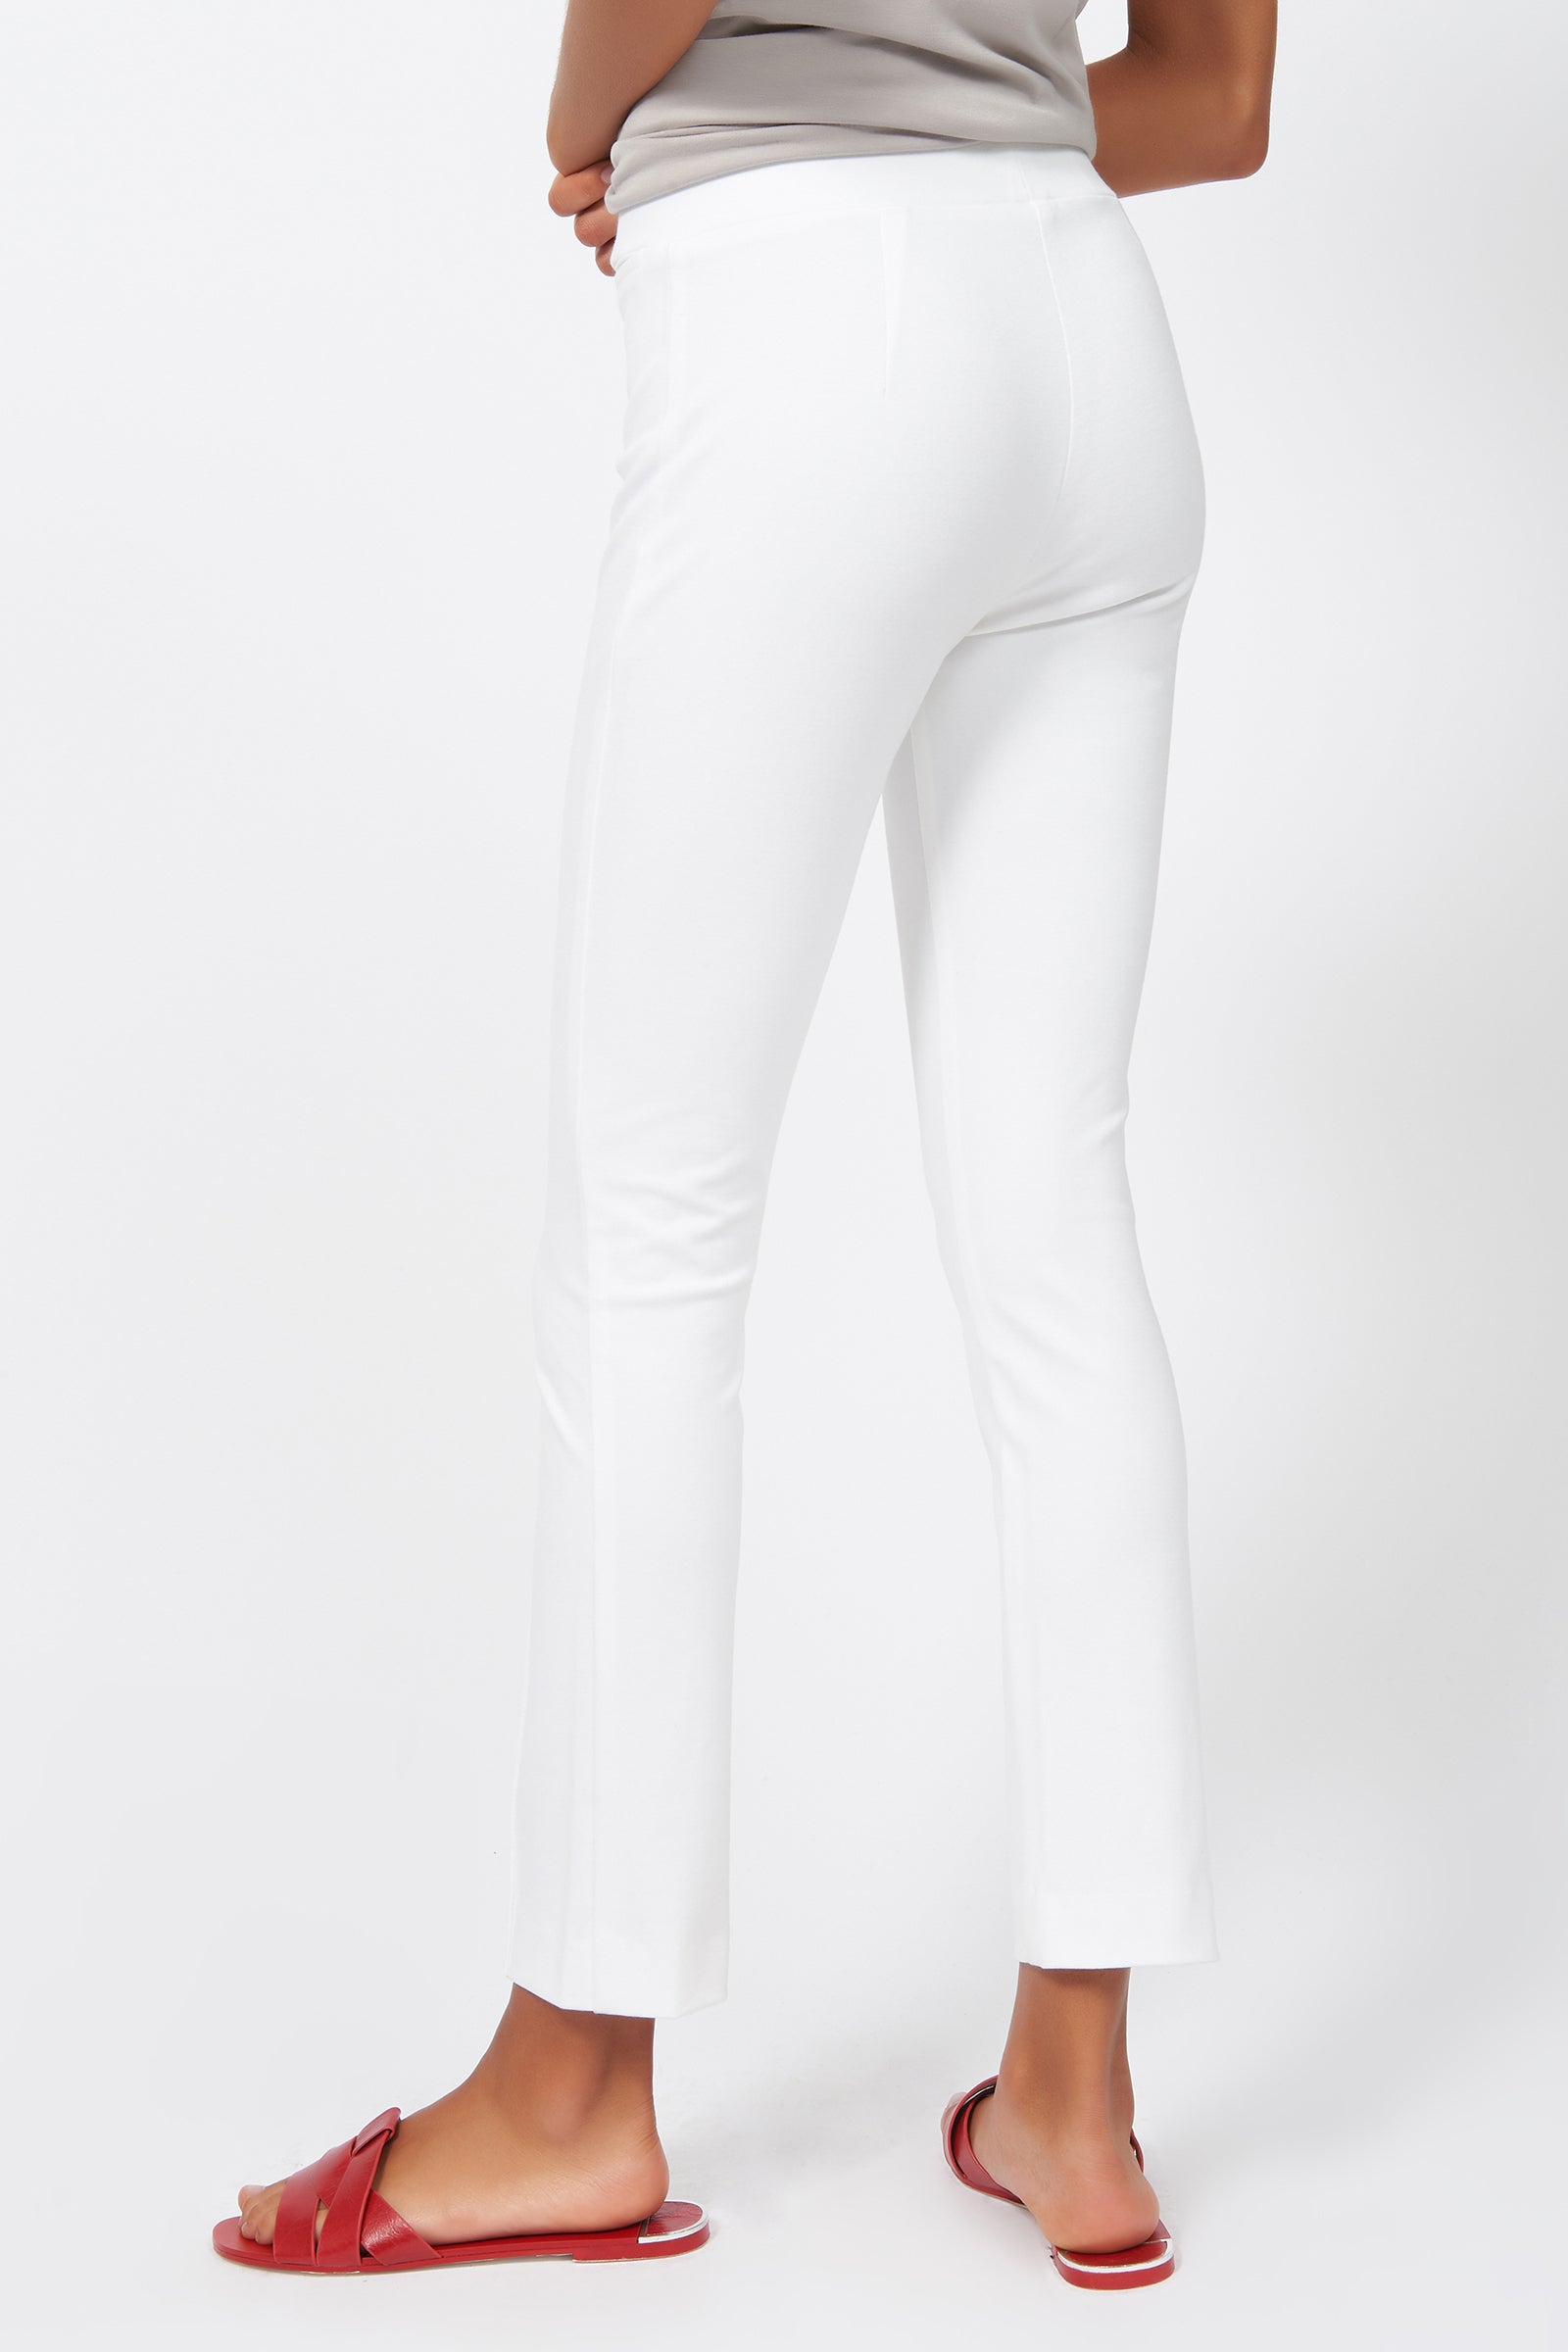 Kal Rieman Pintuck Ponte Ankle Pant in White on Model Full Front View